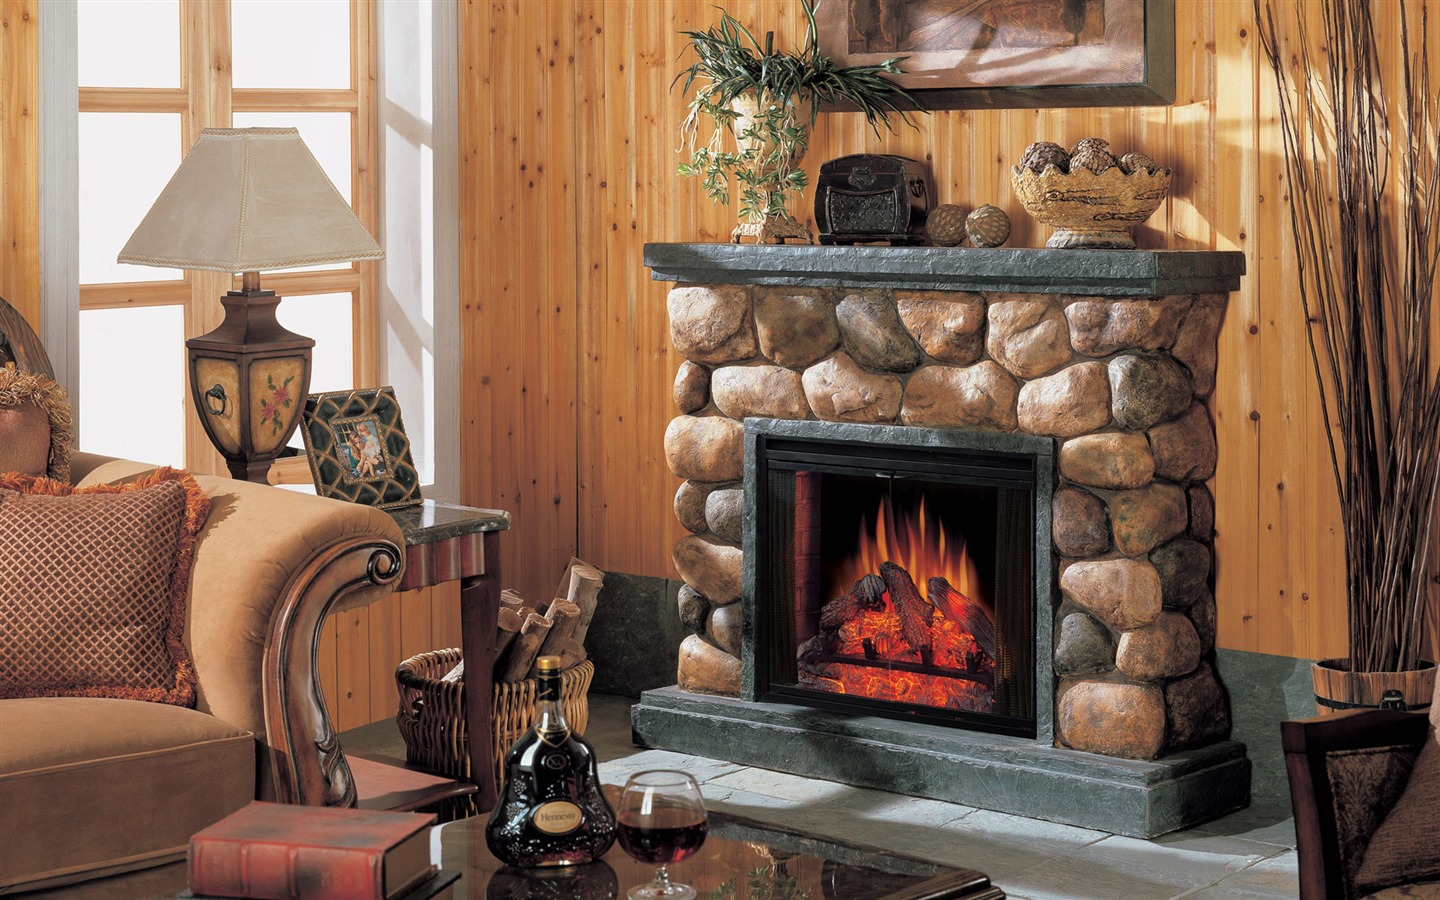 Western-style family fireplace wallpaper (1) #2 - 1440x900